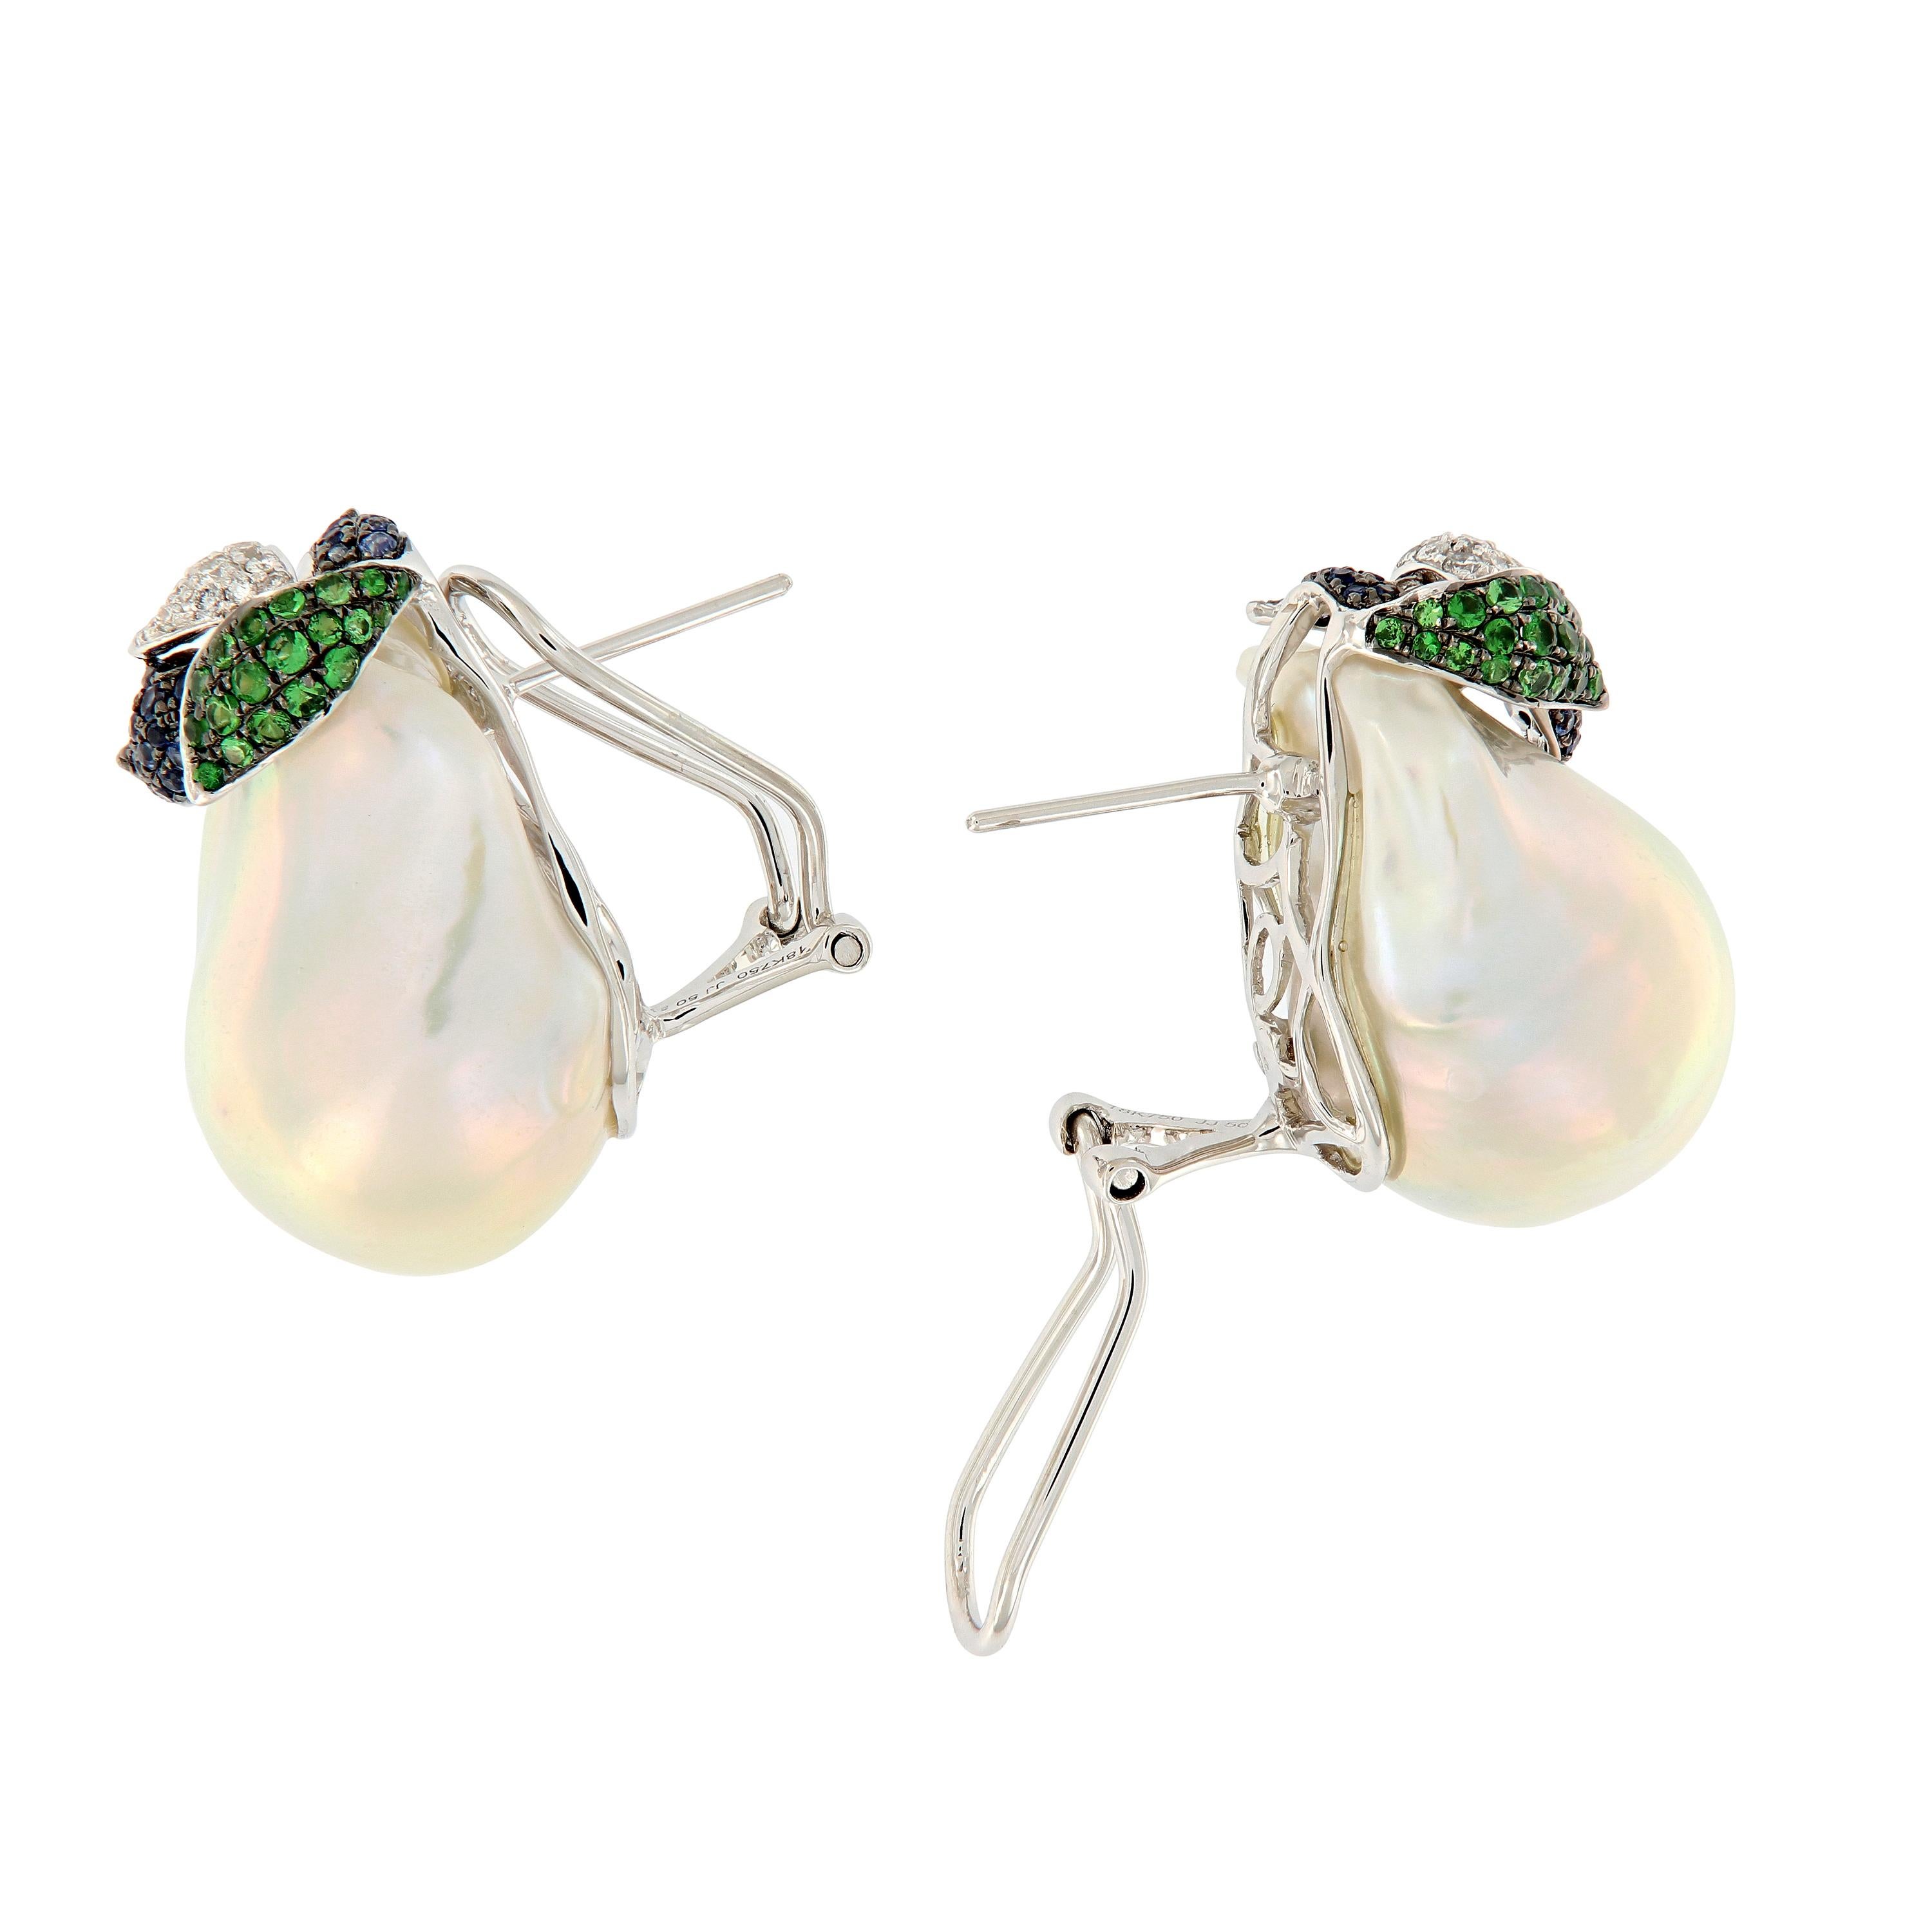 Outstanding large fresh water baroque pearls accented with leafs of blue sapphires, tsavorites and diamonds. Earrings hand crafted in 18k white gold with omega backs.

Sapphires 0.49 cttw
Tsavorite 0.65
Diamonds 0.28 cttw